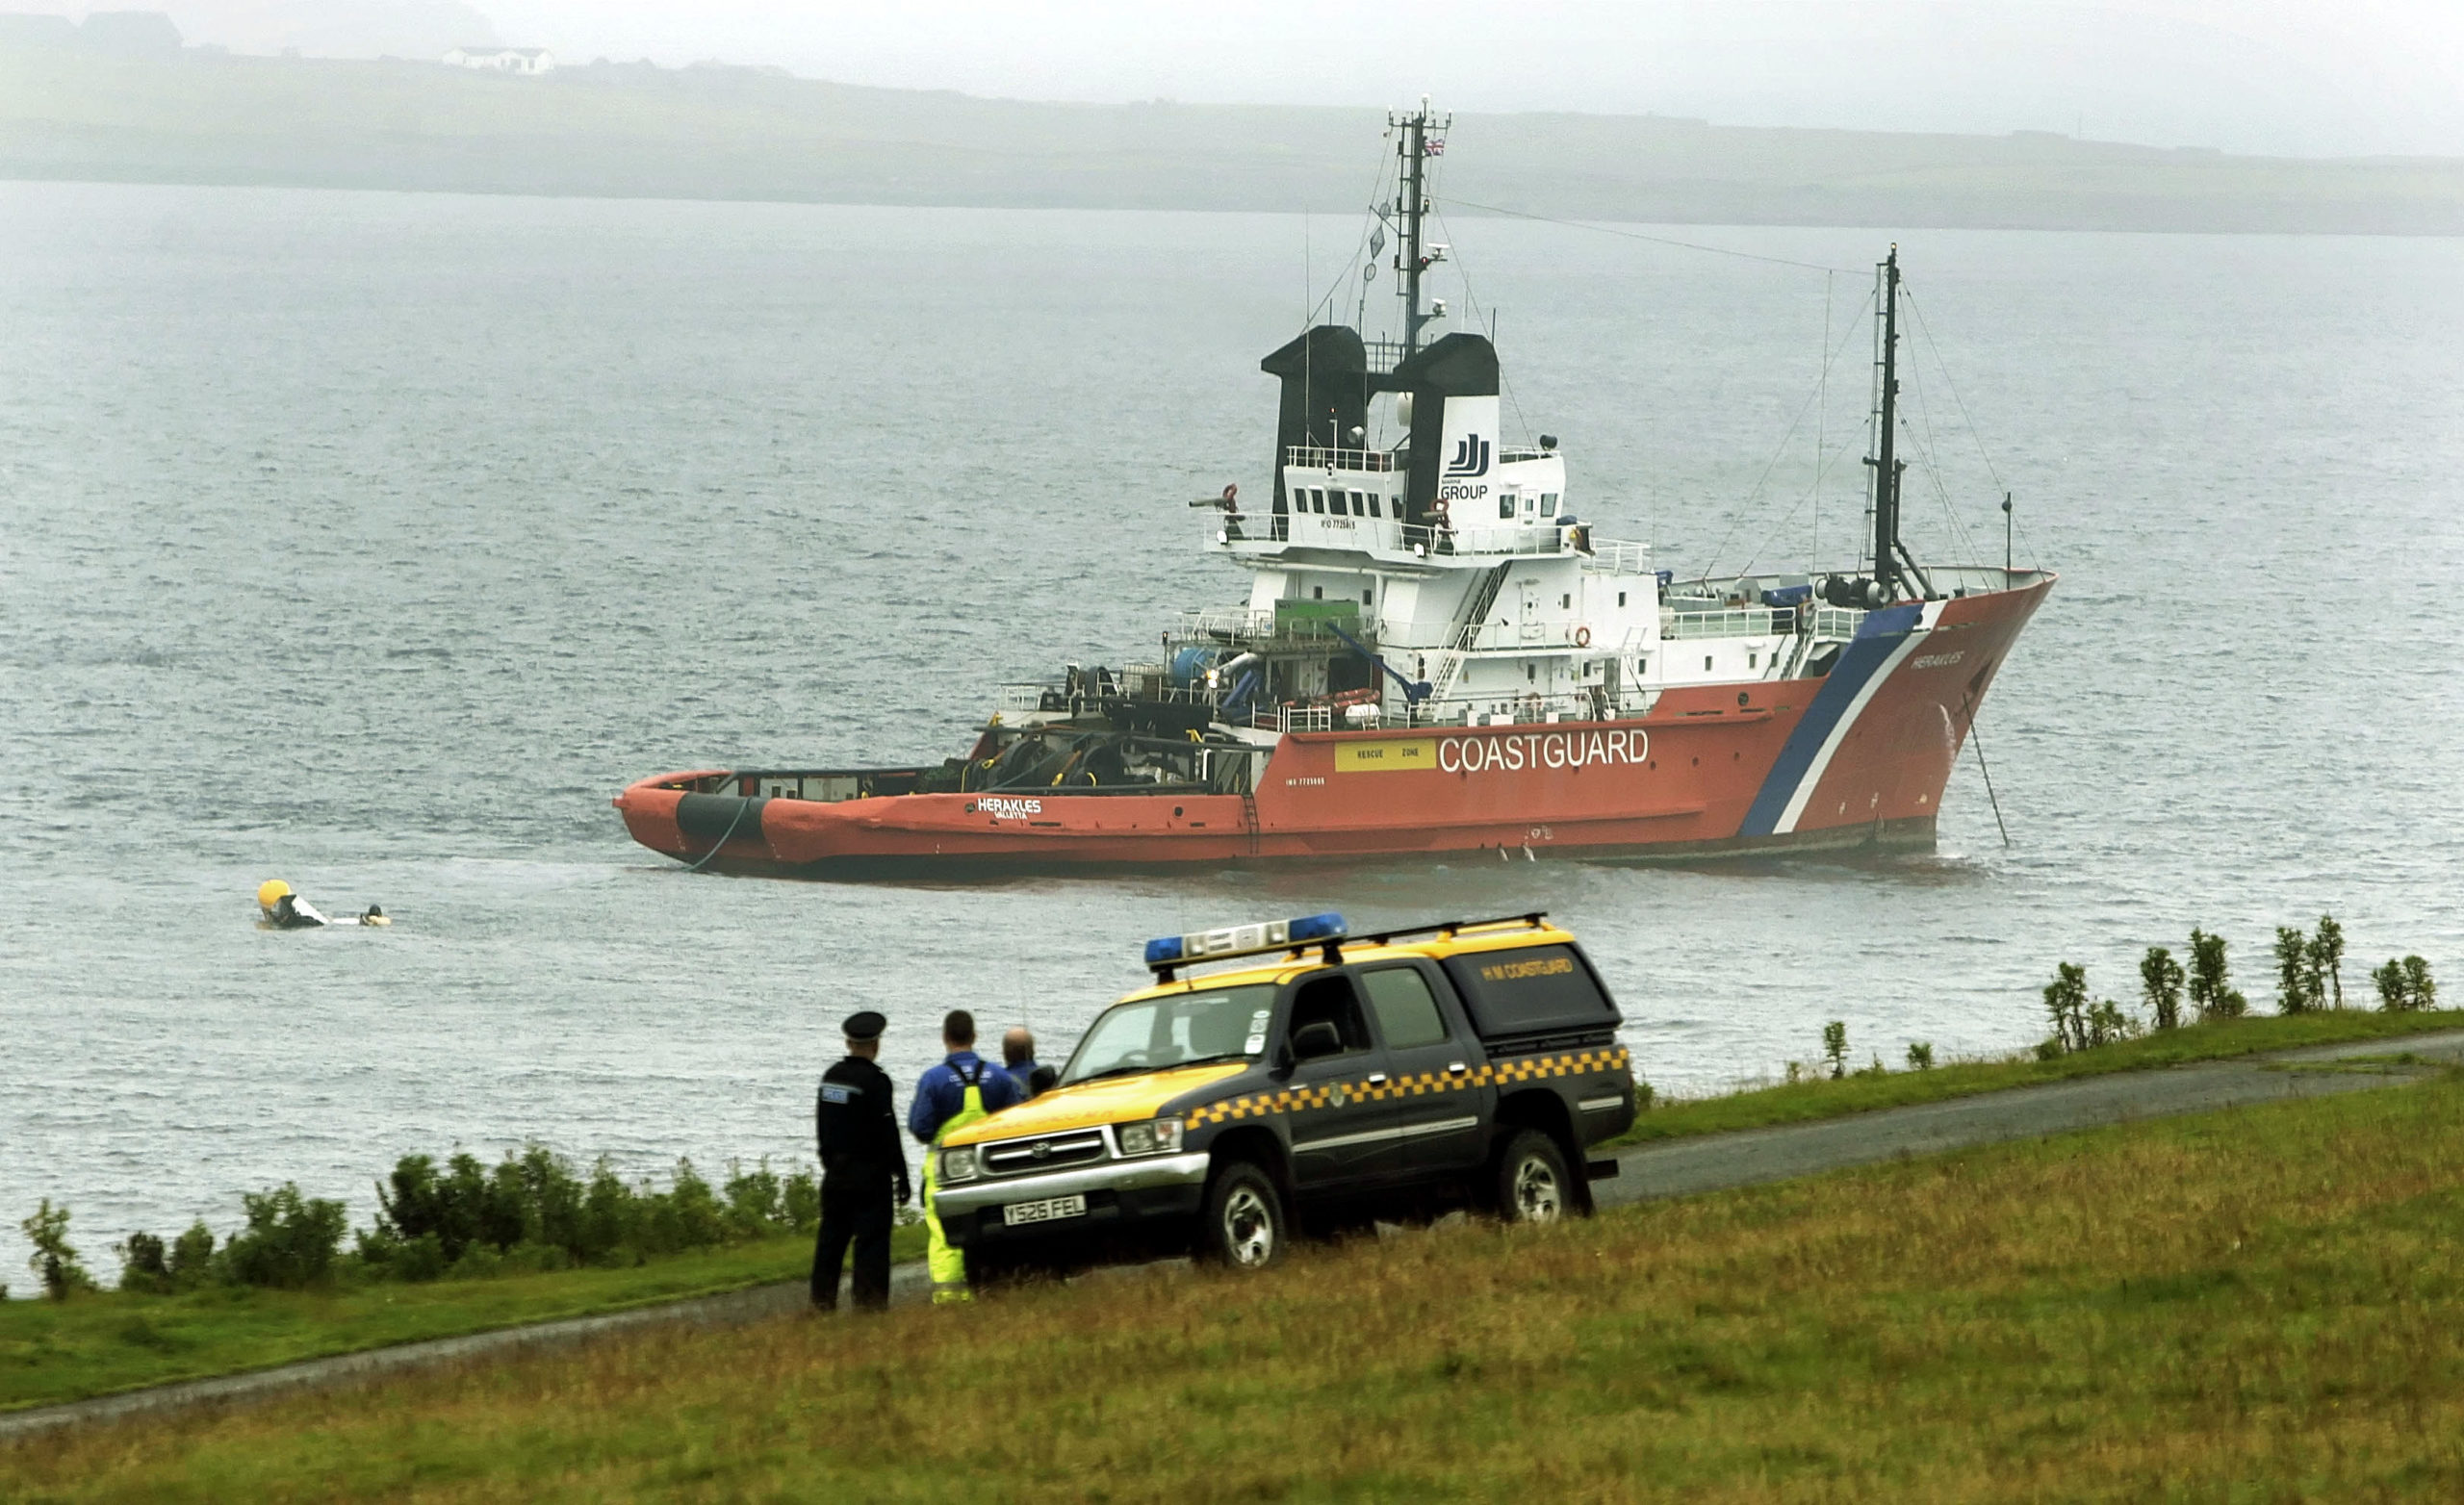 The scene during the recovery operation in 2013.